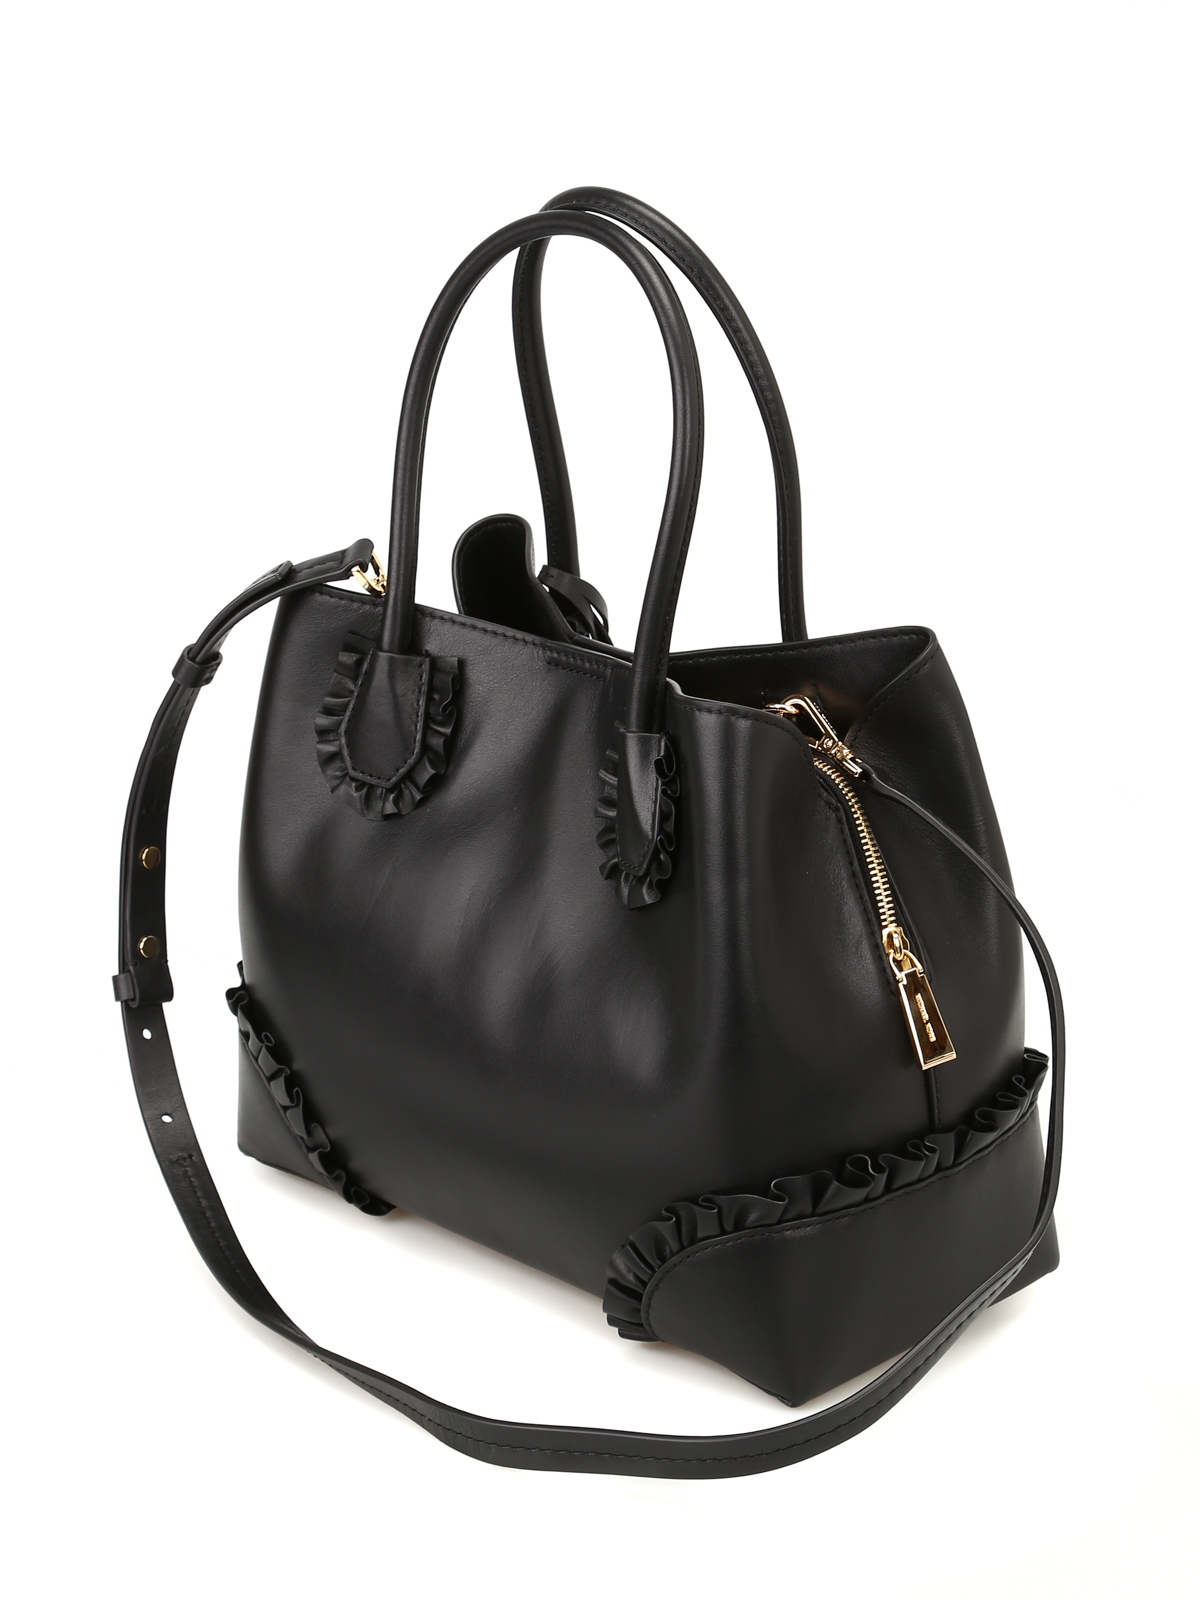 Mercer Gallery Medium Faux Leather Tote Bag